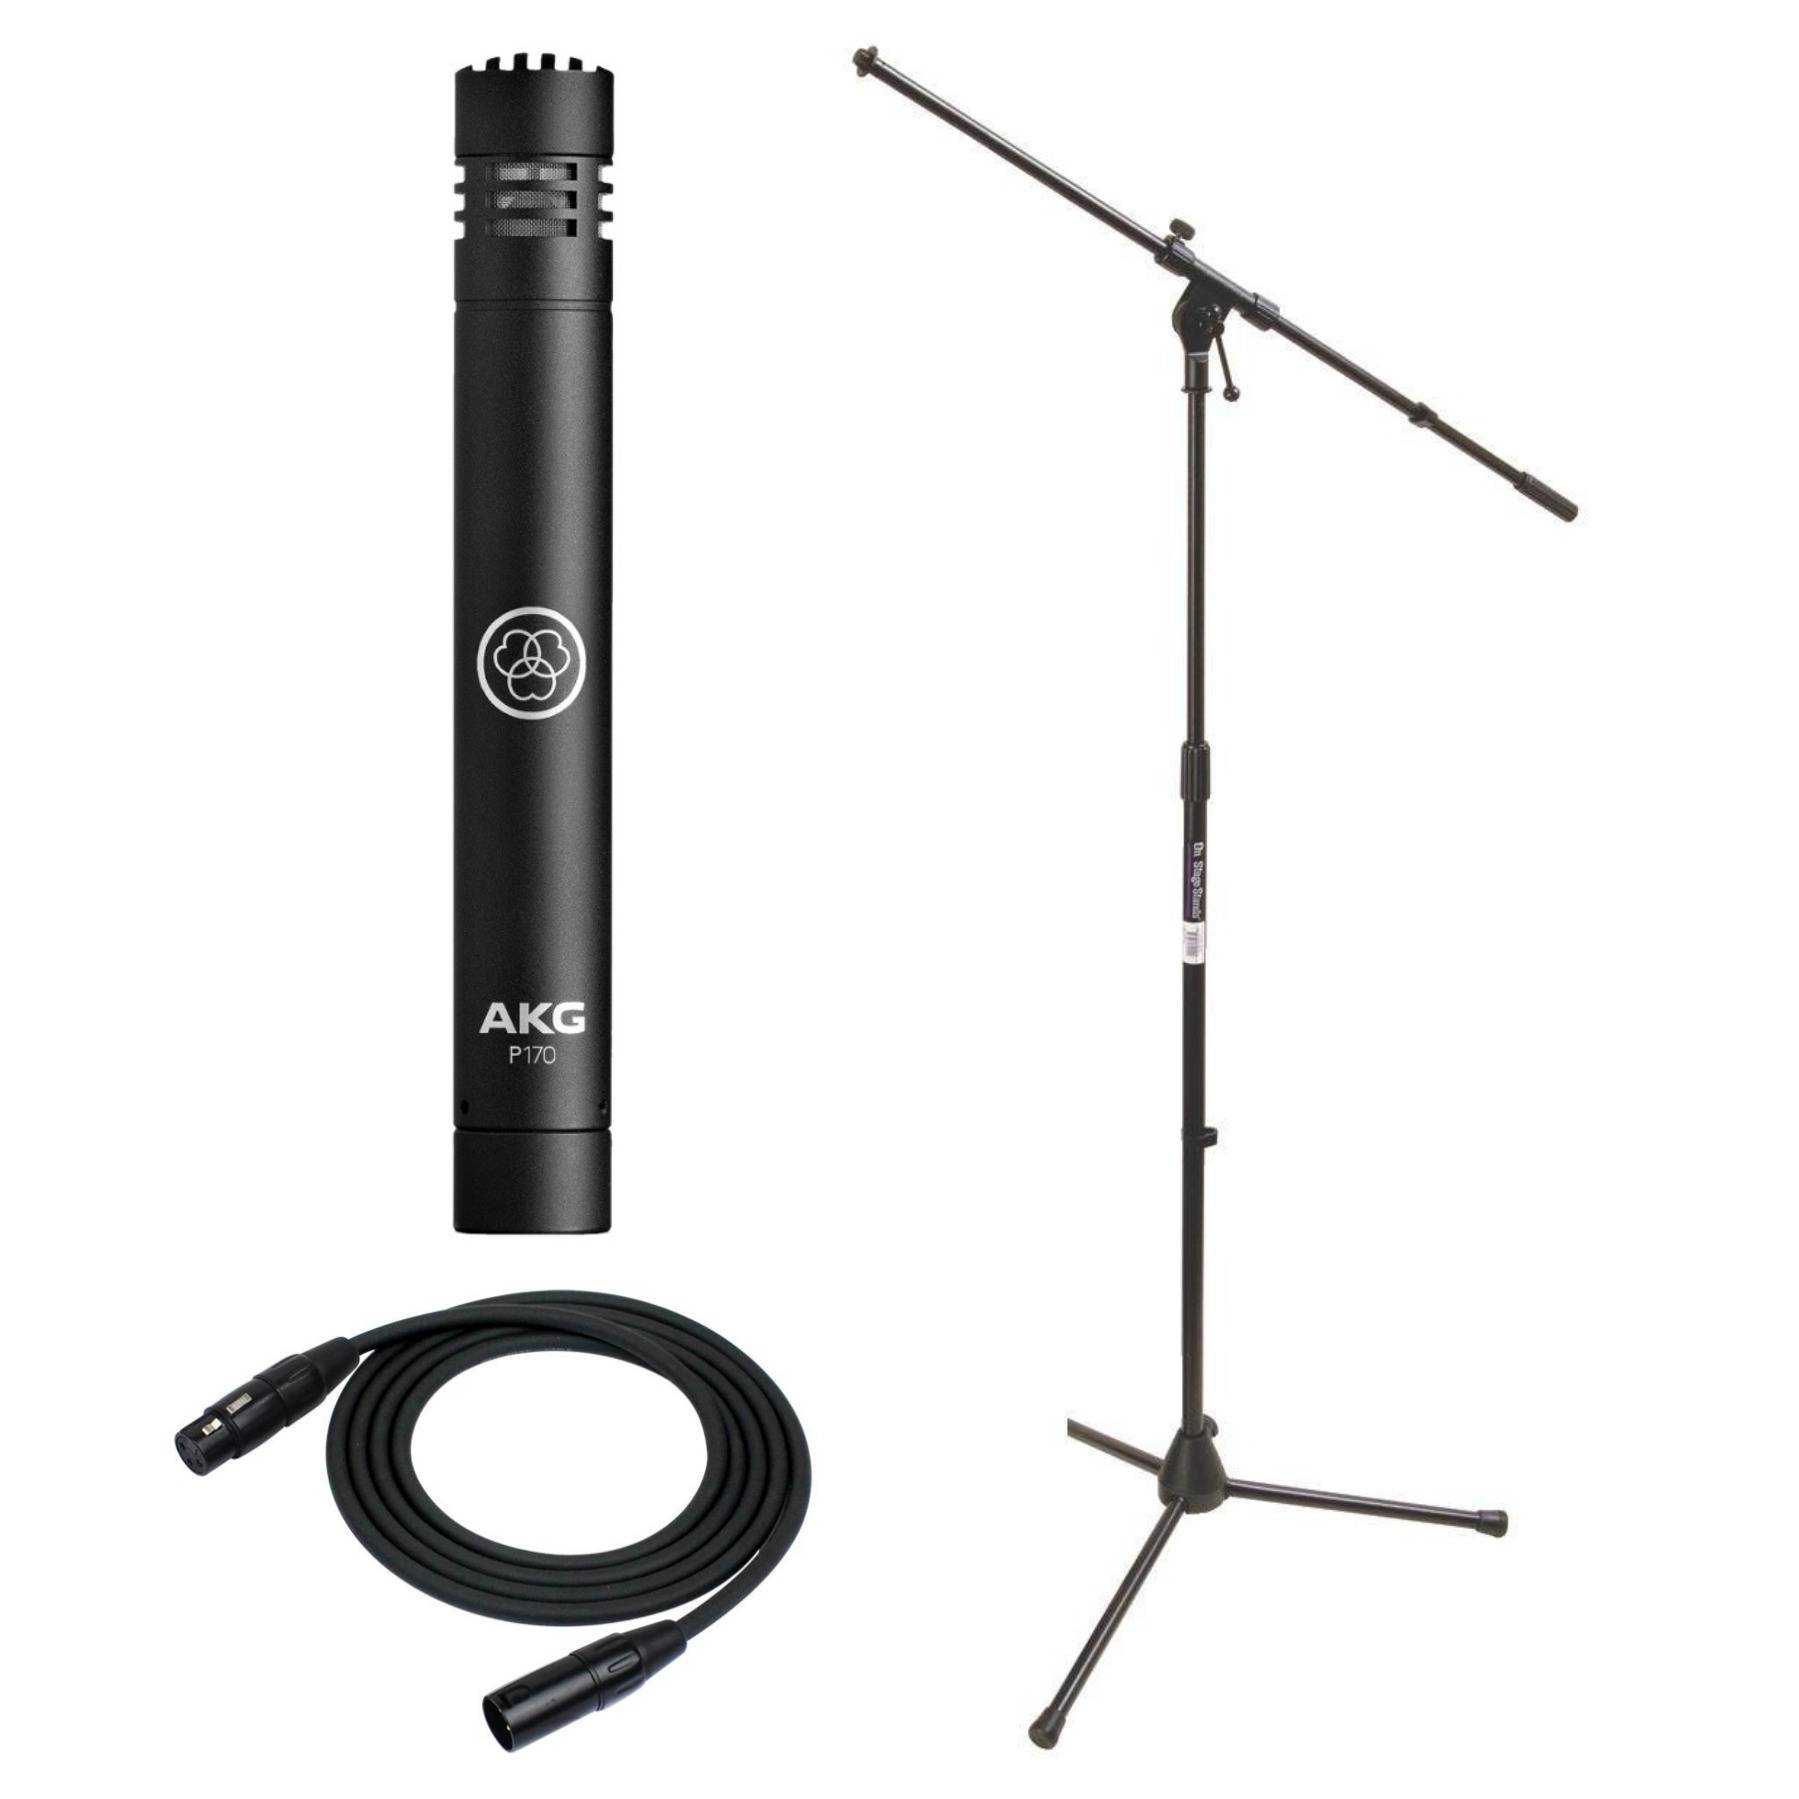 AKG P170 Professional Instrumental Microphone with Microphone Stand and Cable Bundle